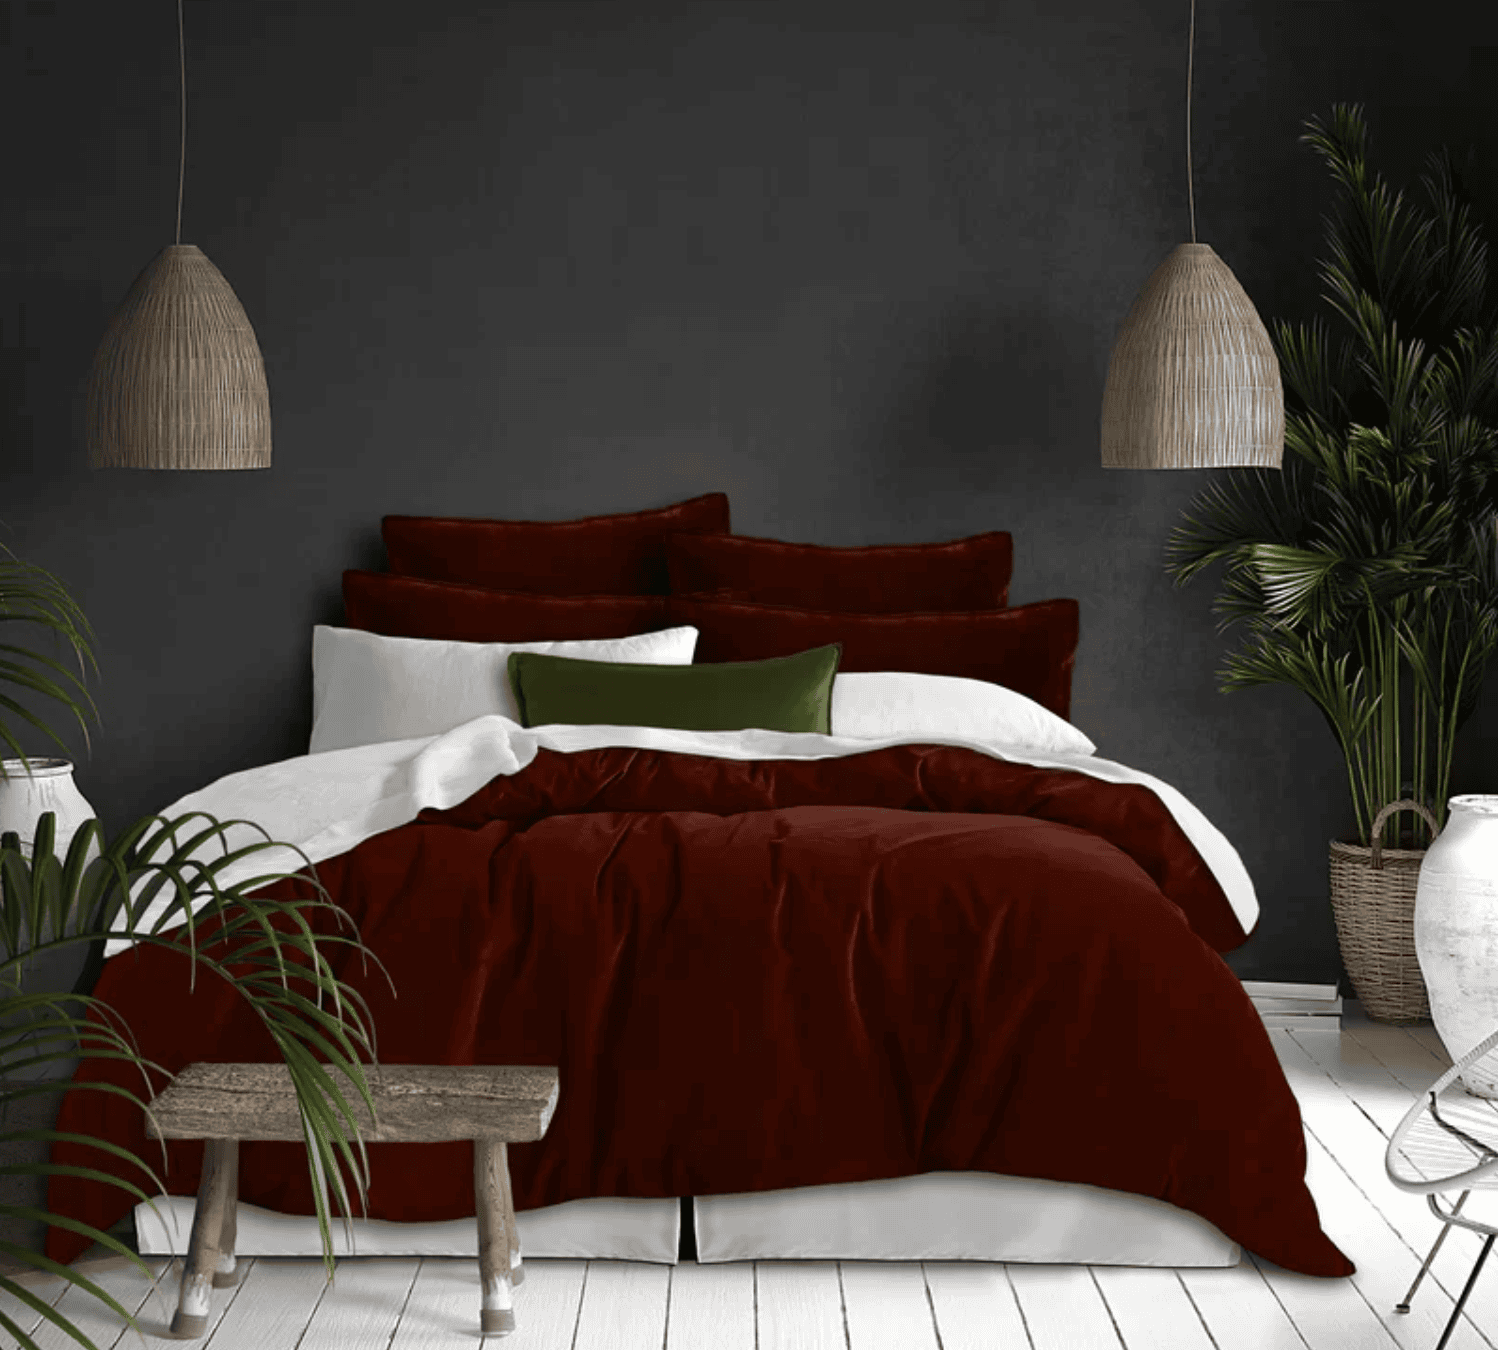 Inspiration for a red and black bedroom